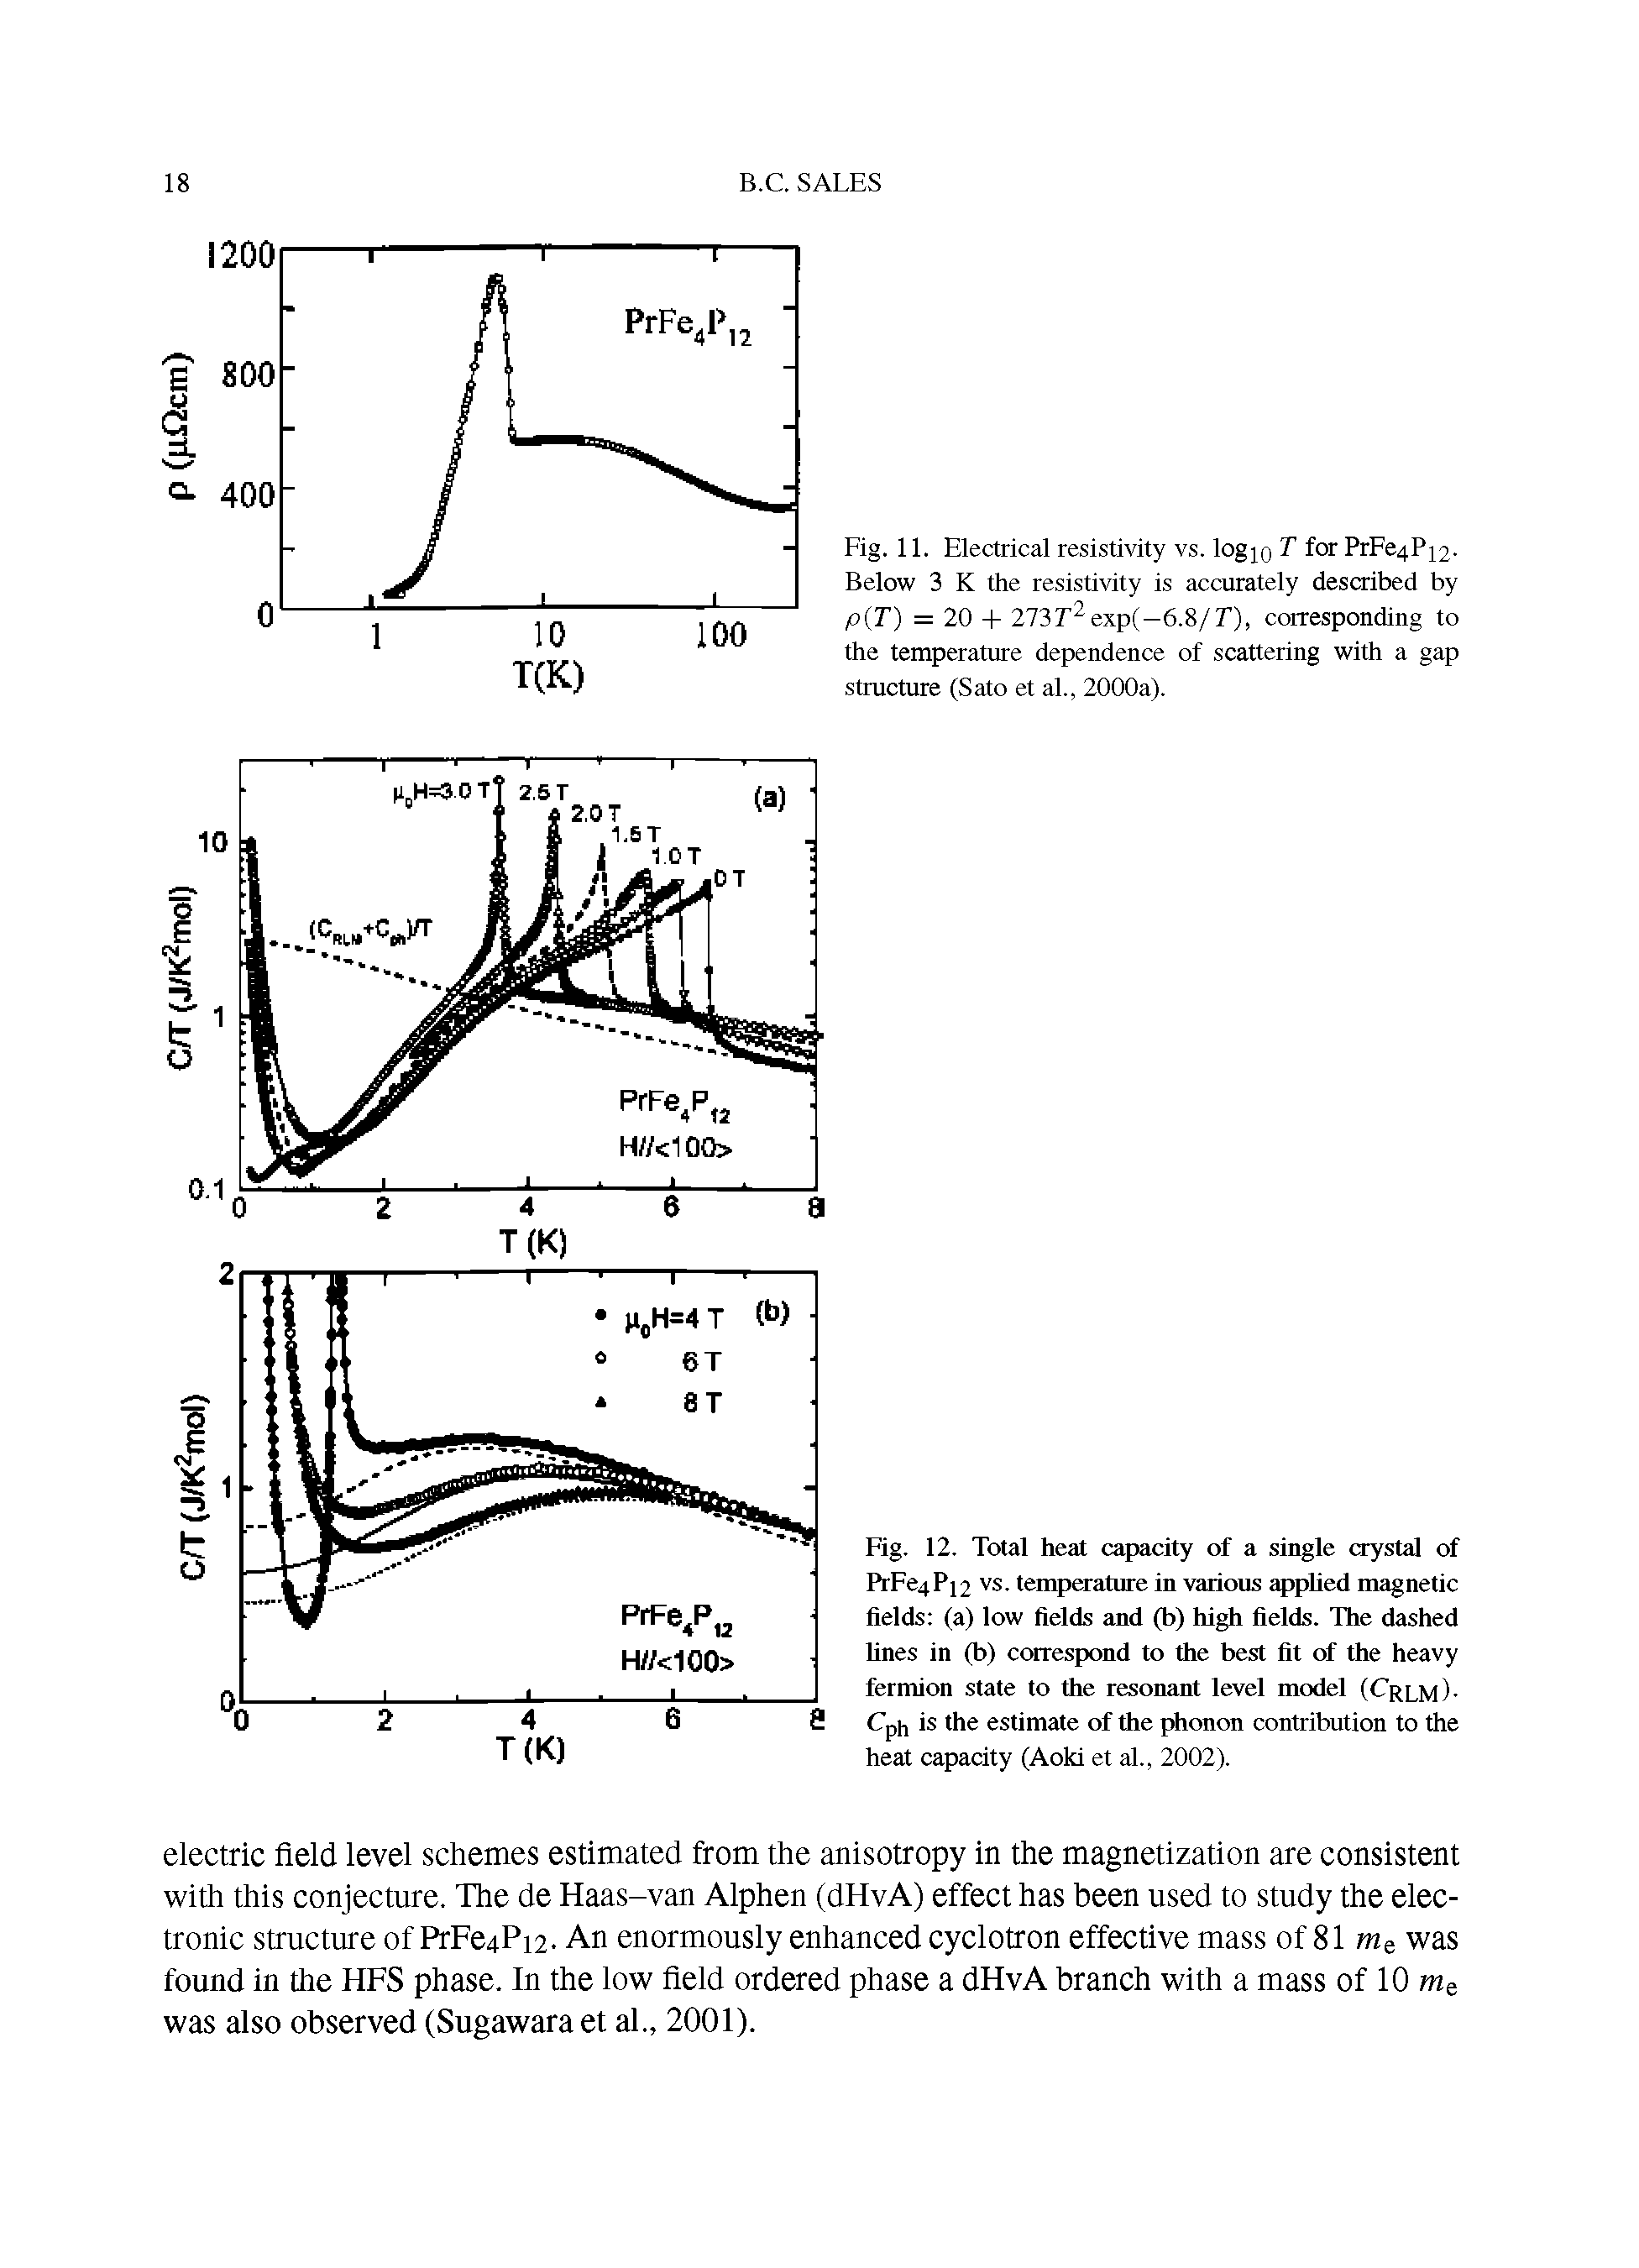 Fig. 12. Total heat capacity of a single crystal of PrFe4Pi2 vs. temperature in various applied magnetic fields (a) low fields and (b) high fields. The dashed fines in (b) correspond to the best fit of the heavy fermion state to die resonant level model (Crlm)-Cph is the estimate of die phonon contribution to the heat capacity (Aoki et al., 2002).